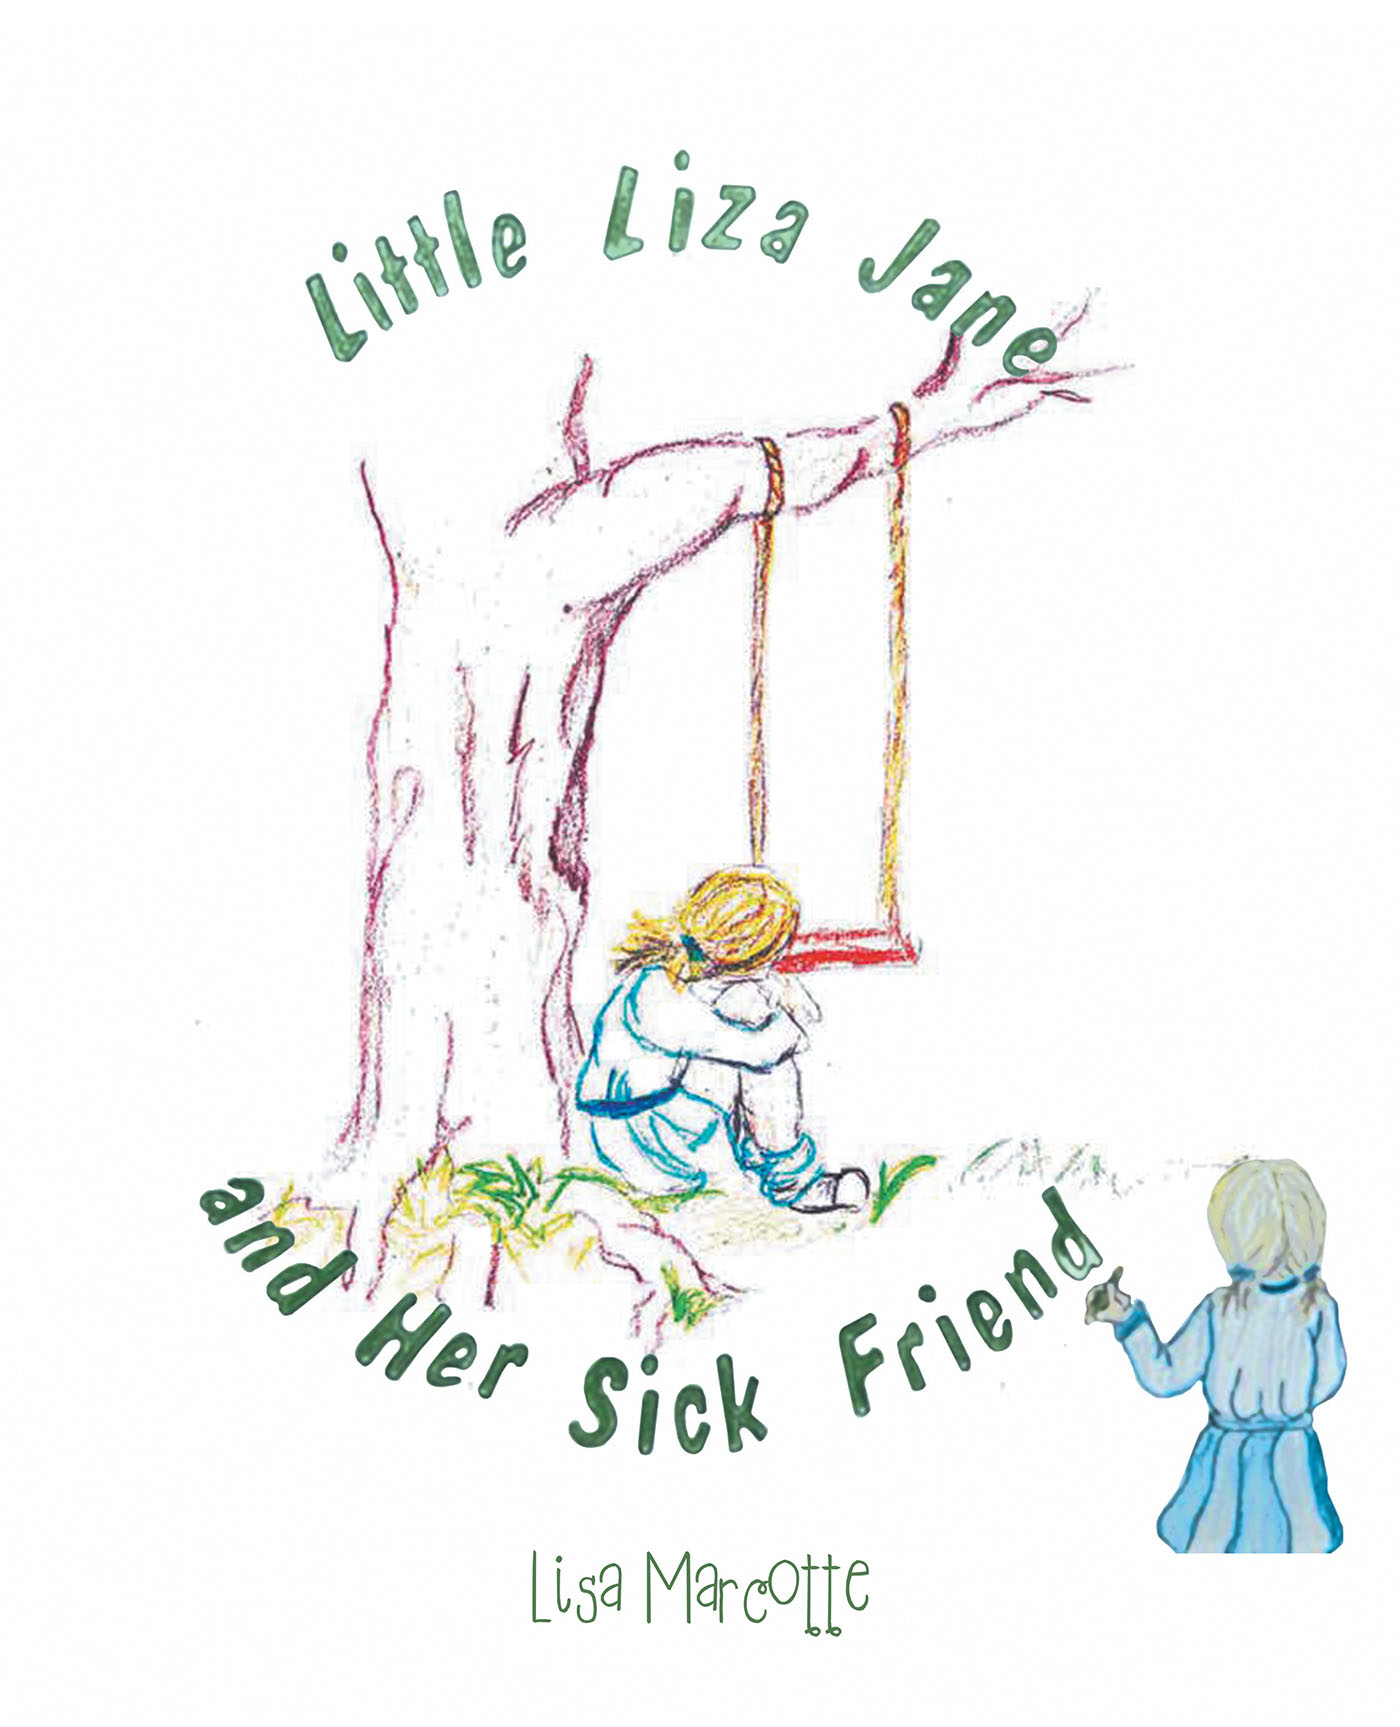 Author Lisa Marcotte’s New Book, "Little Liza Jane and Her Sick Friend," Reveals Incredible Joy One Can Feel When Helping Others Feel Better with Acts of Kindness